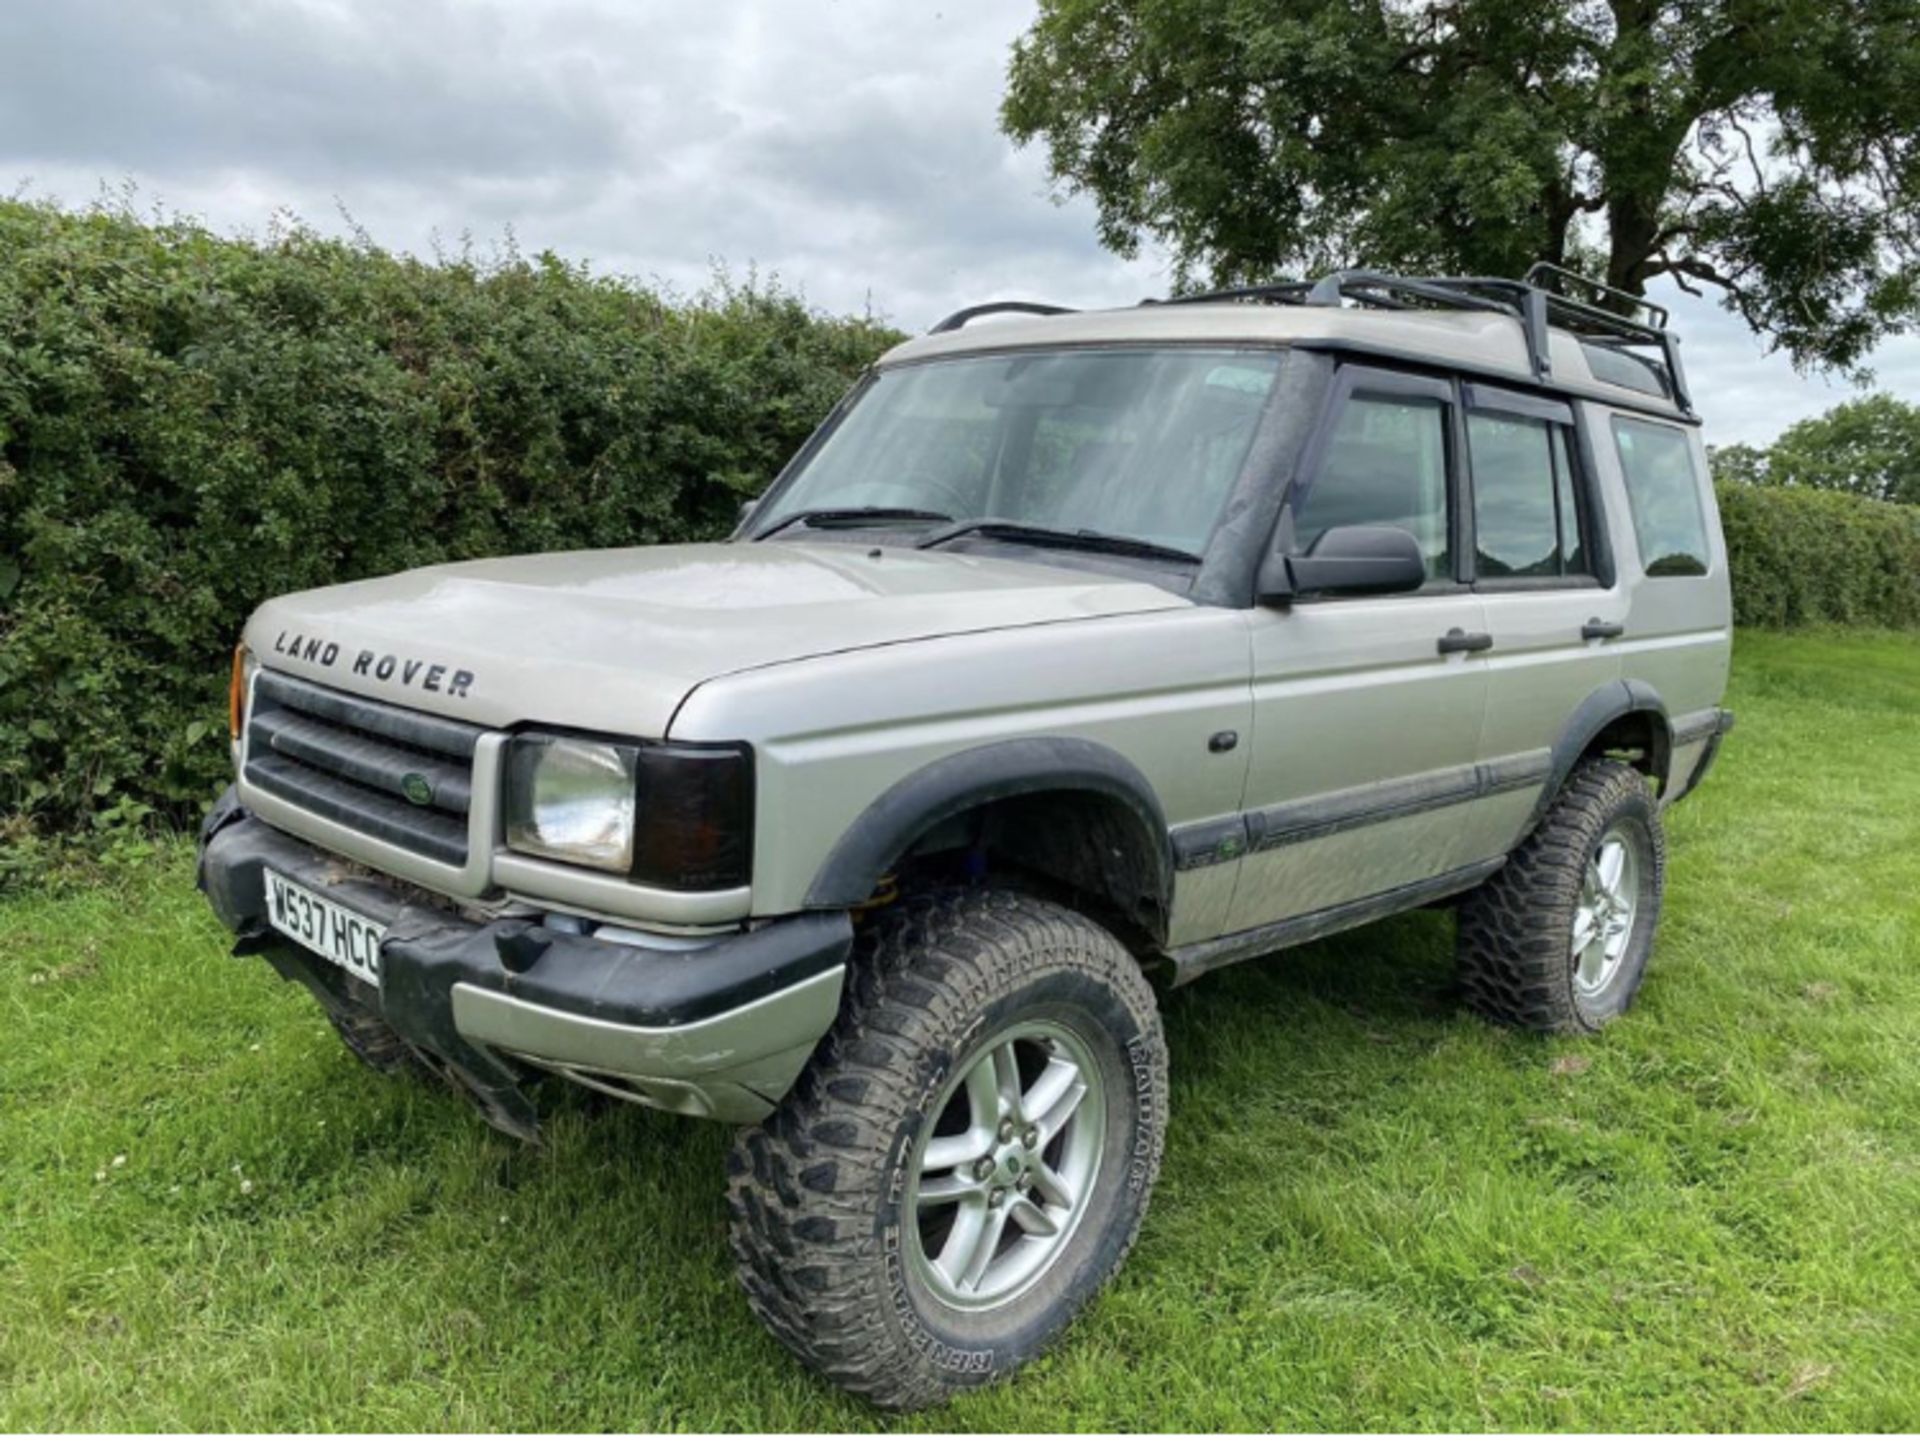 LAND ROVER DISCOVERY TD5 GS OFF ROAD 4X4X MONSTER TRUCK LOCATION: NORTH YORKSHIRE - Image 7 of 11